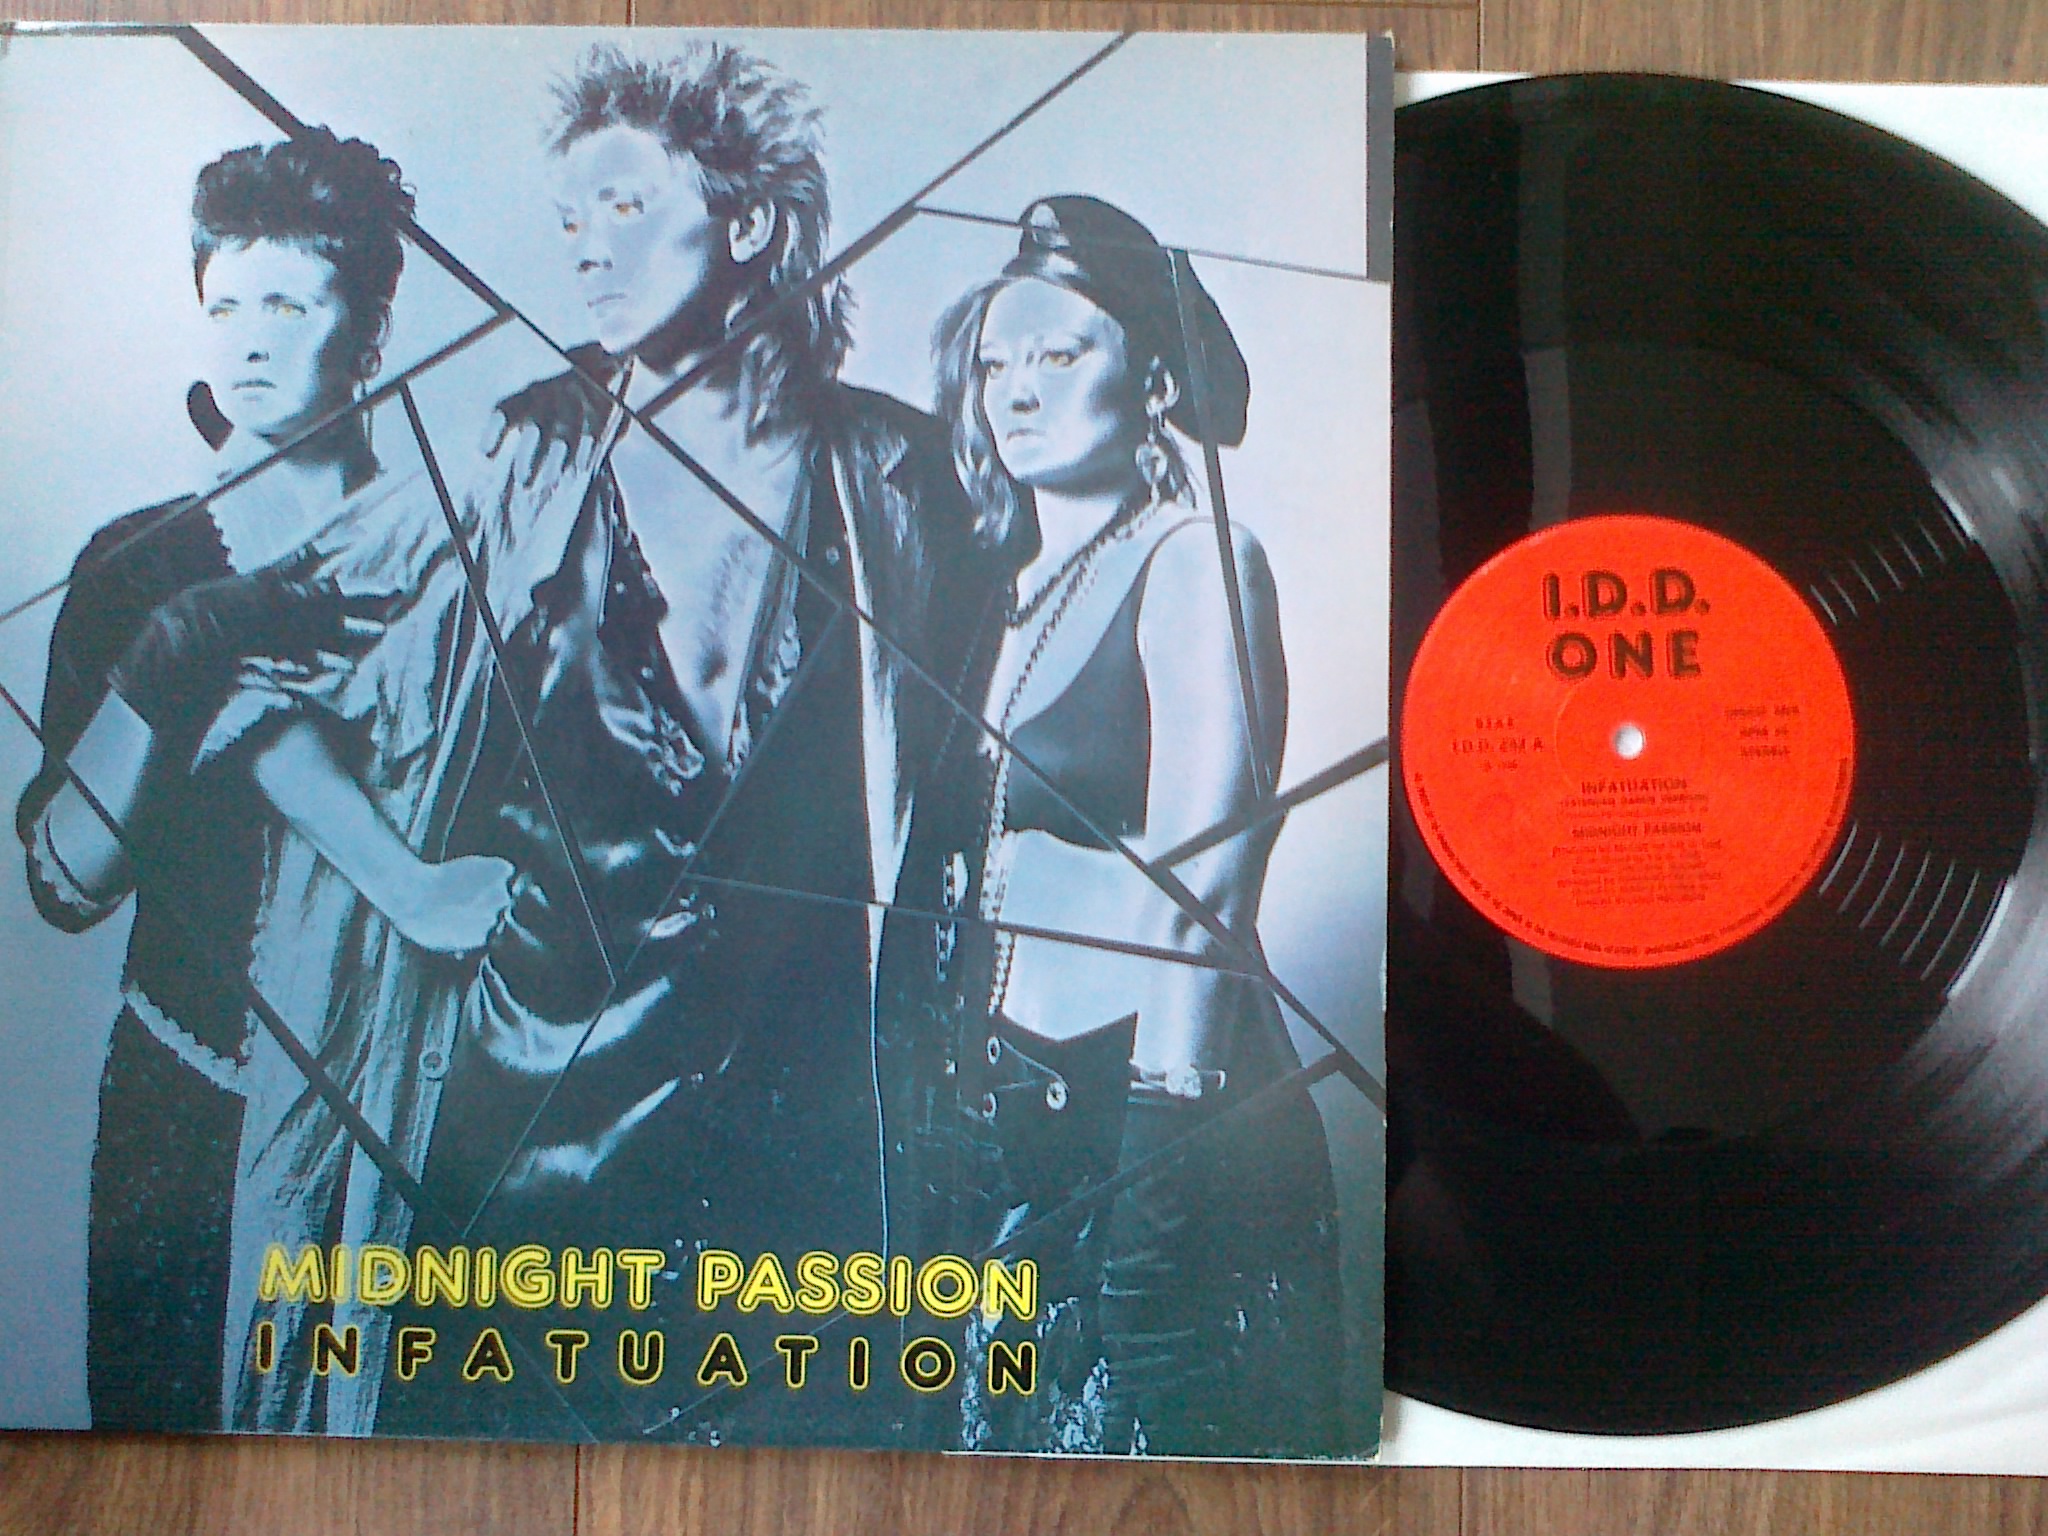 Midnght Passion - Infatuation